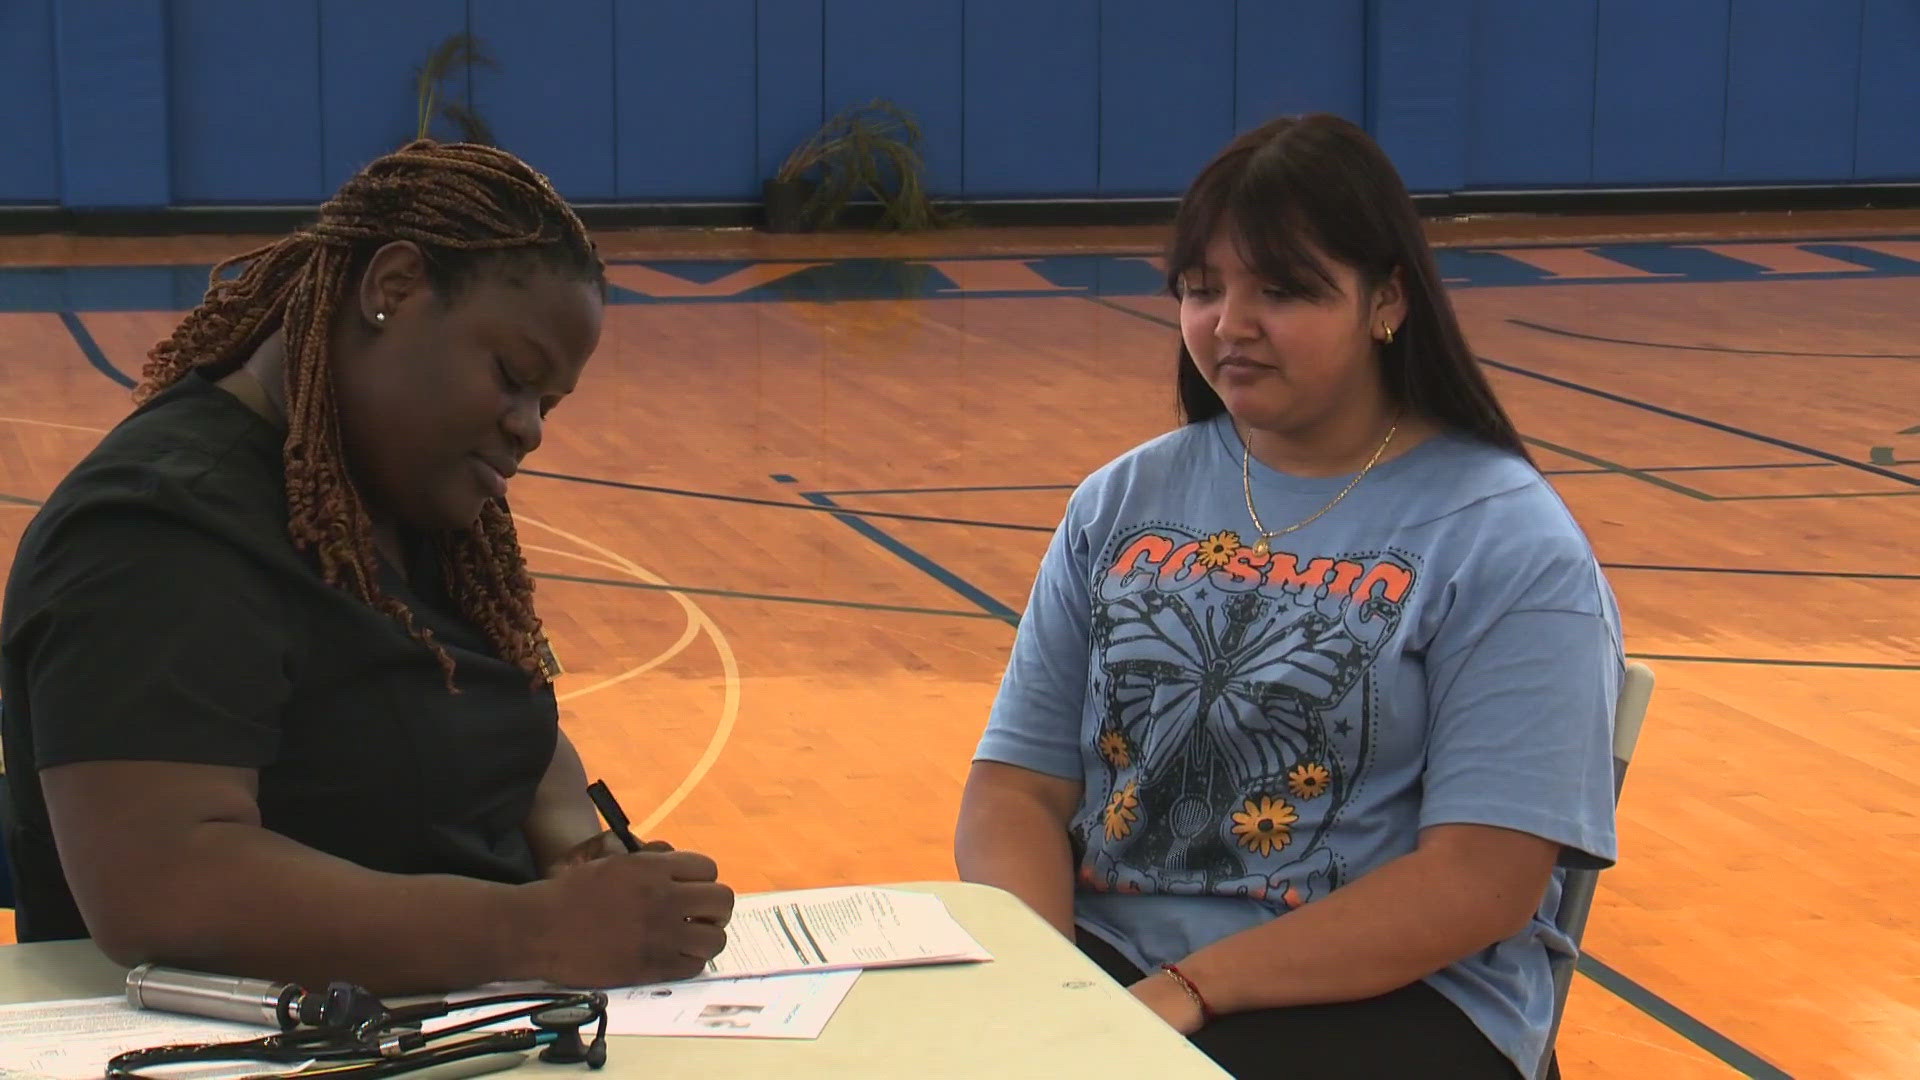 The district provided free physicals for students ahead of the upcoming school year.